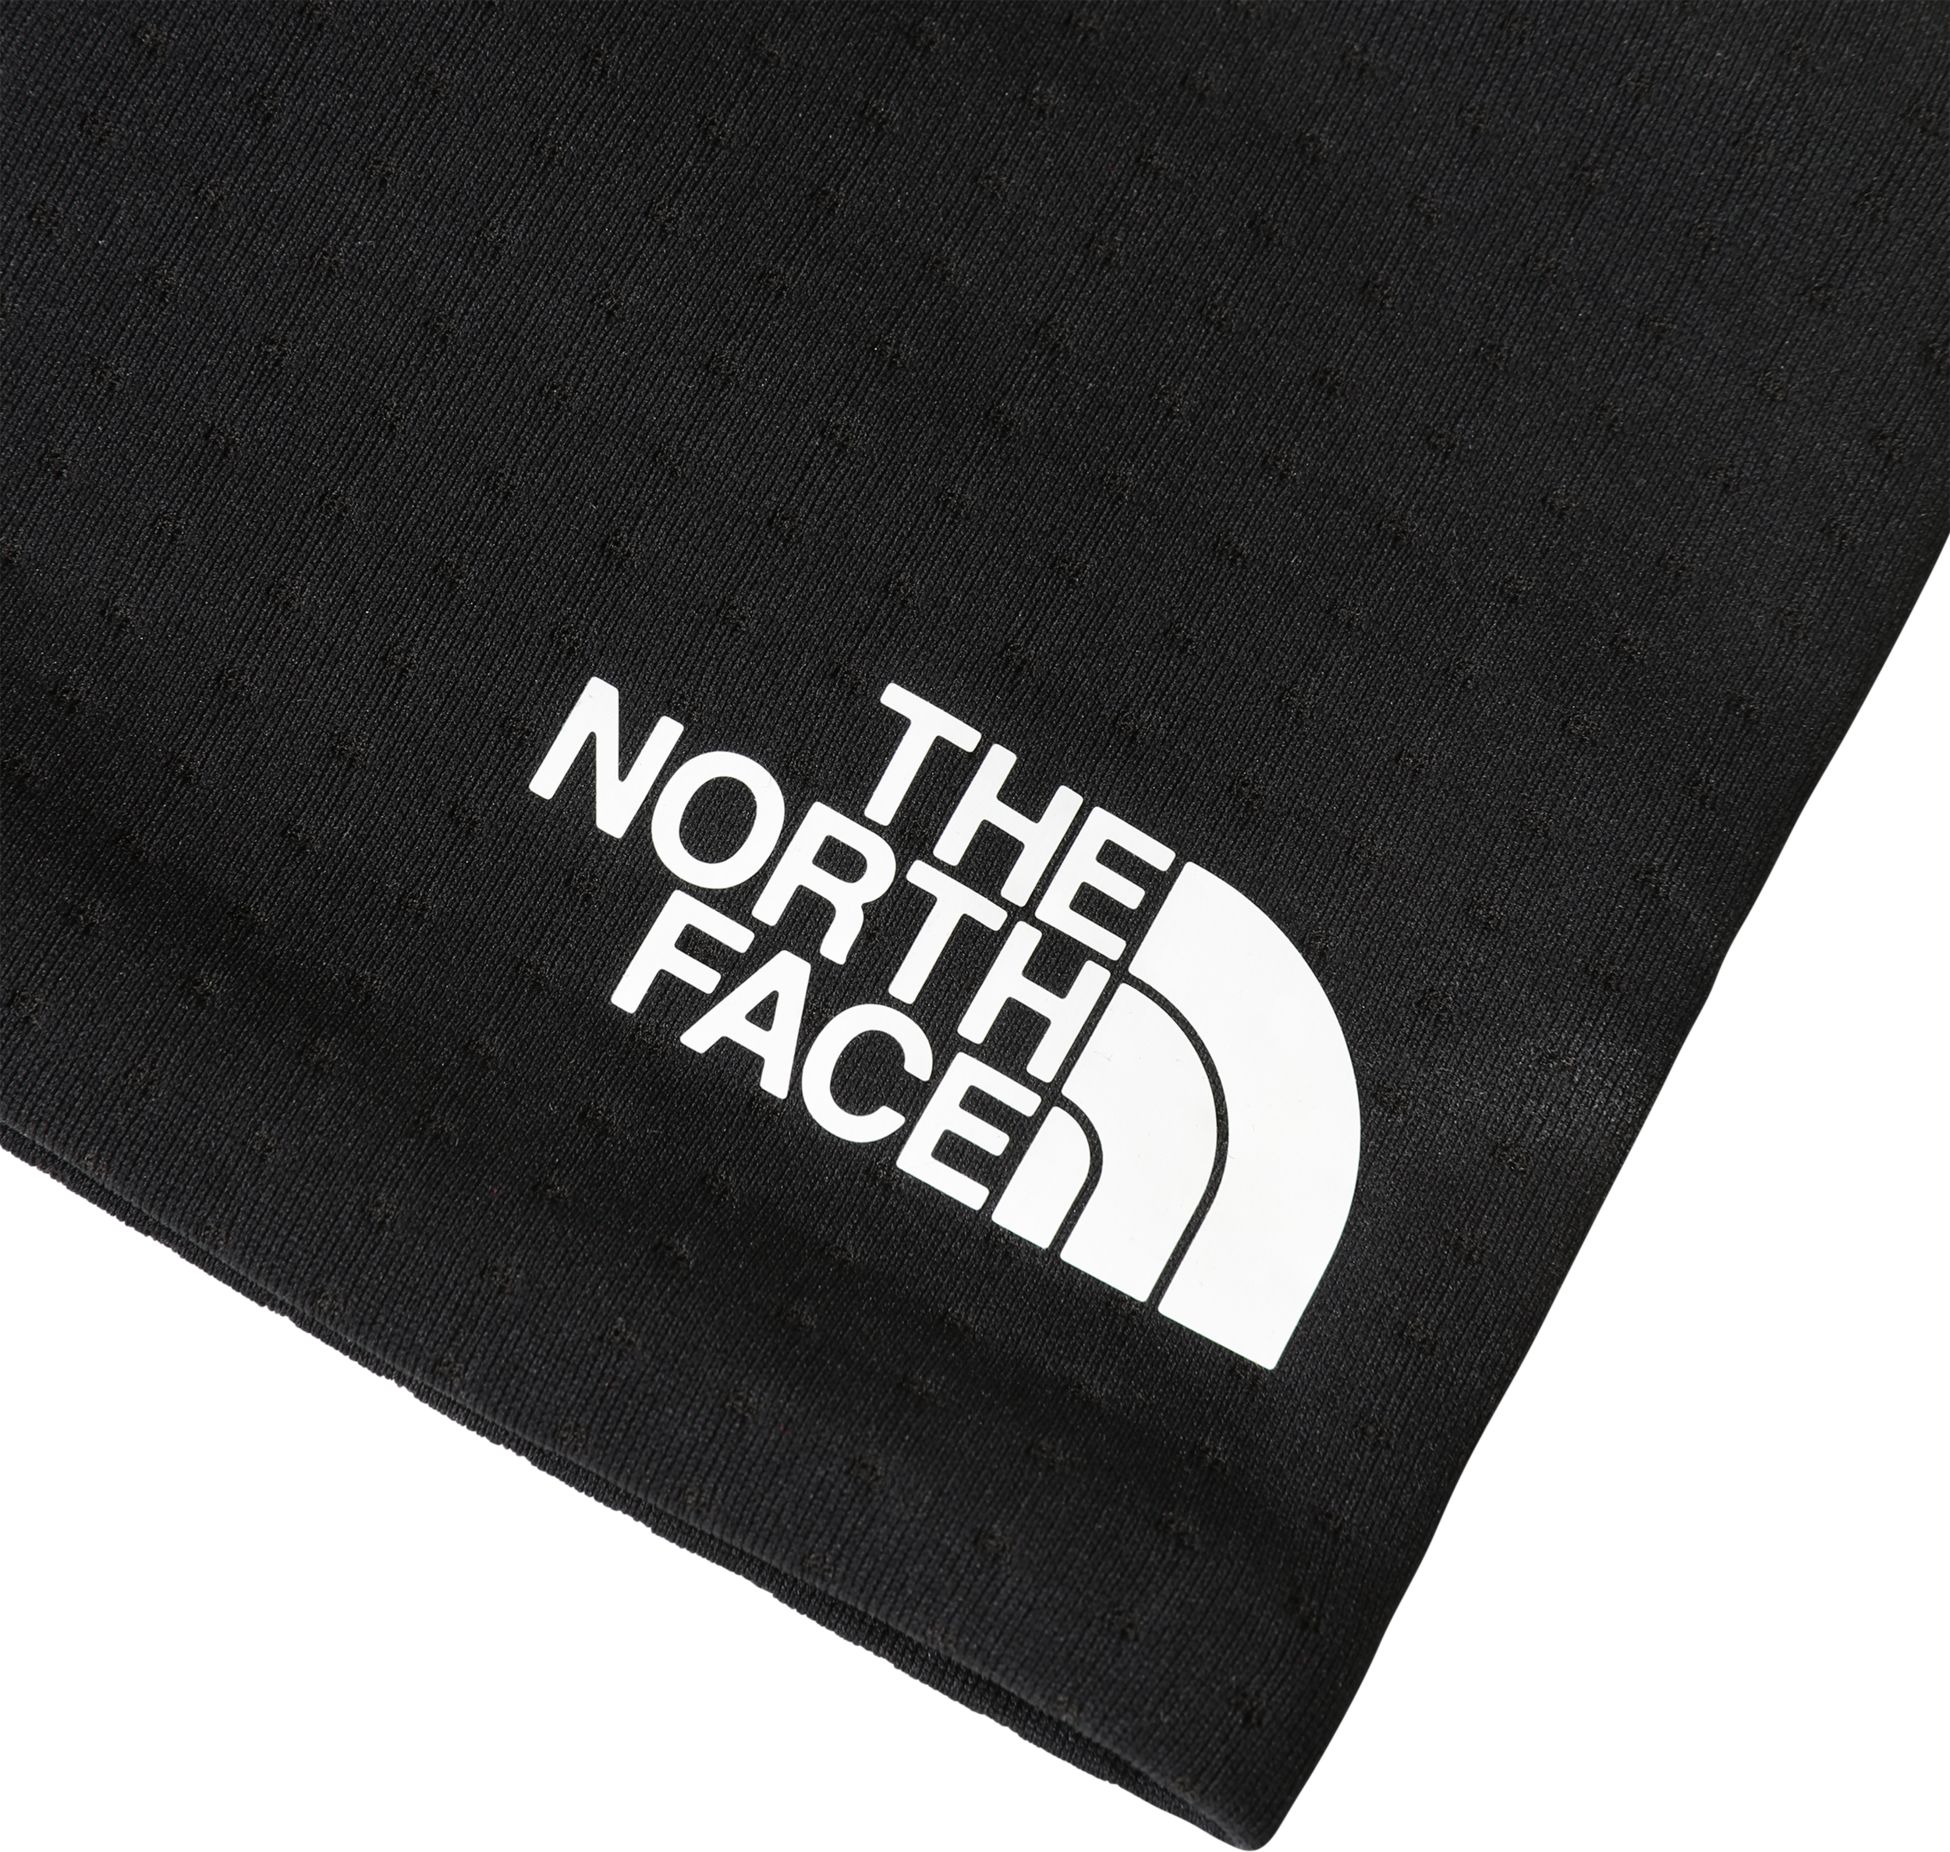 THE NORTH FACE, FASTECH HEADBAND